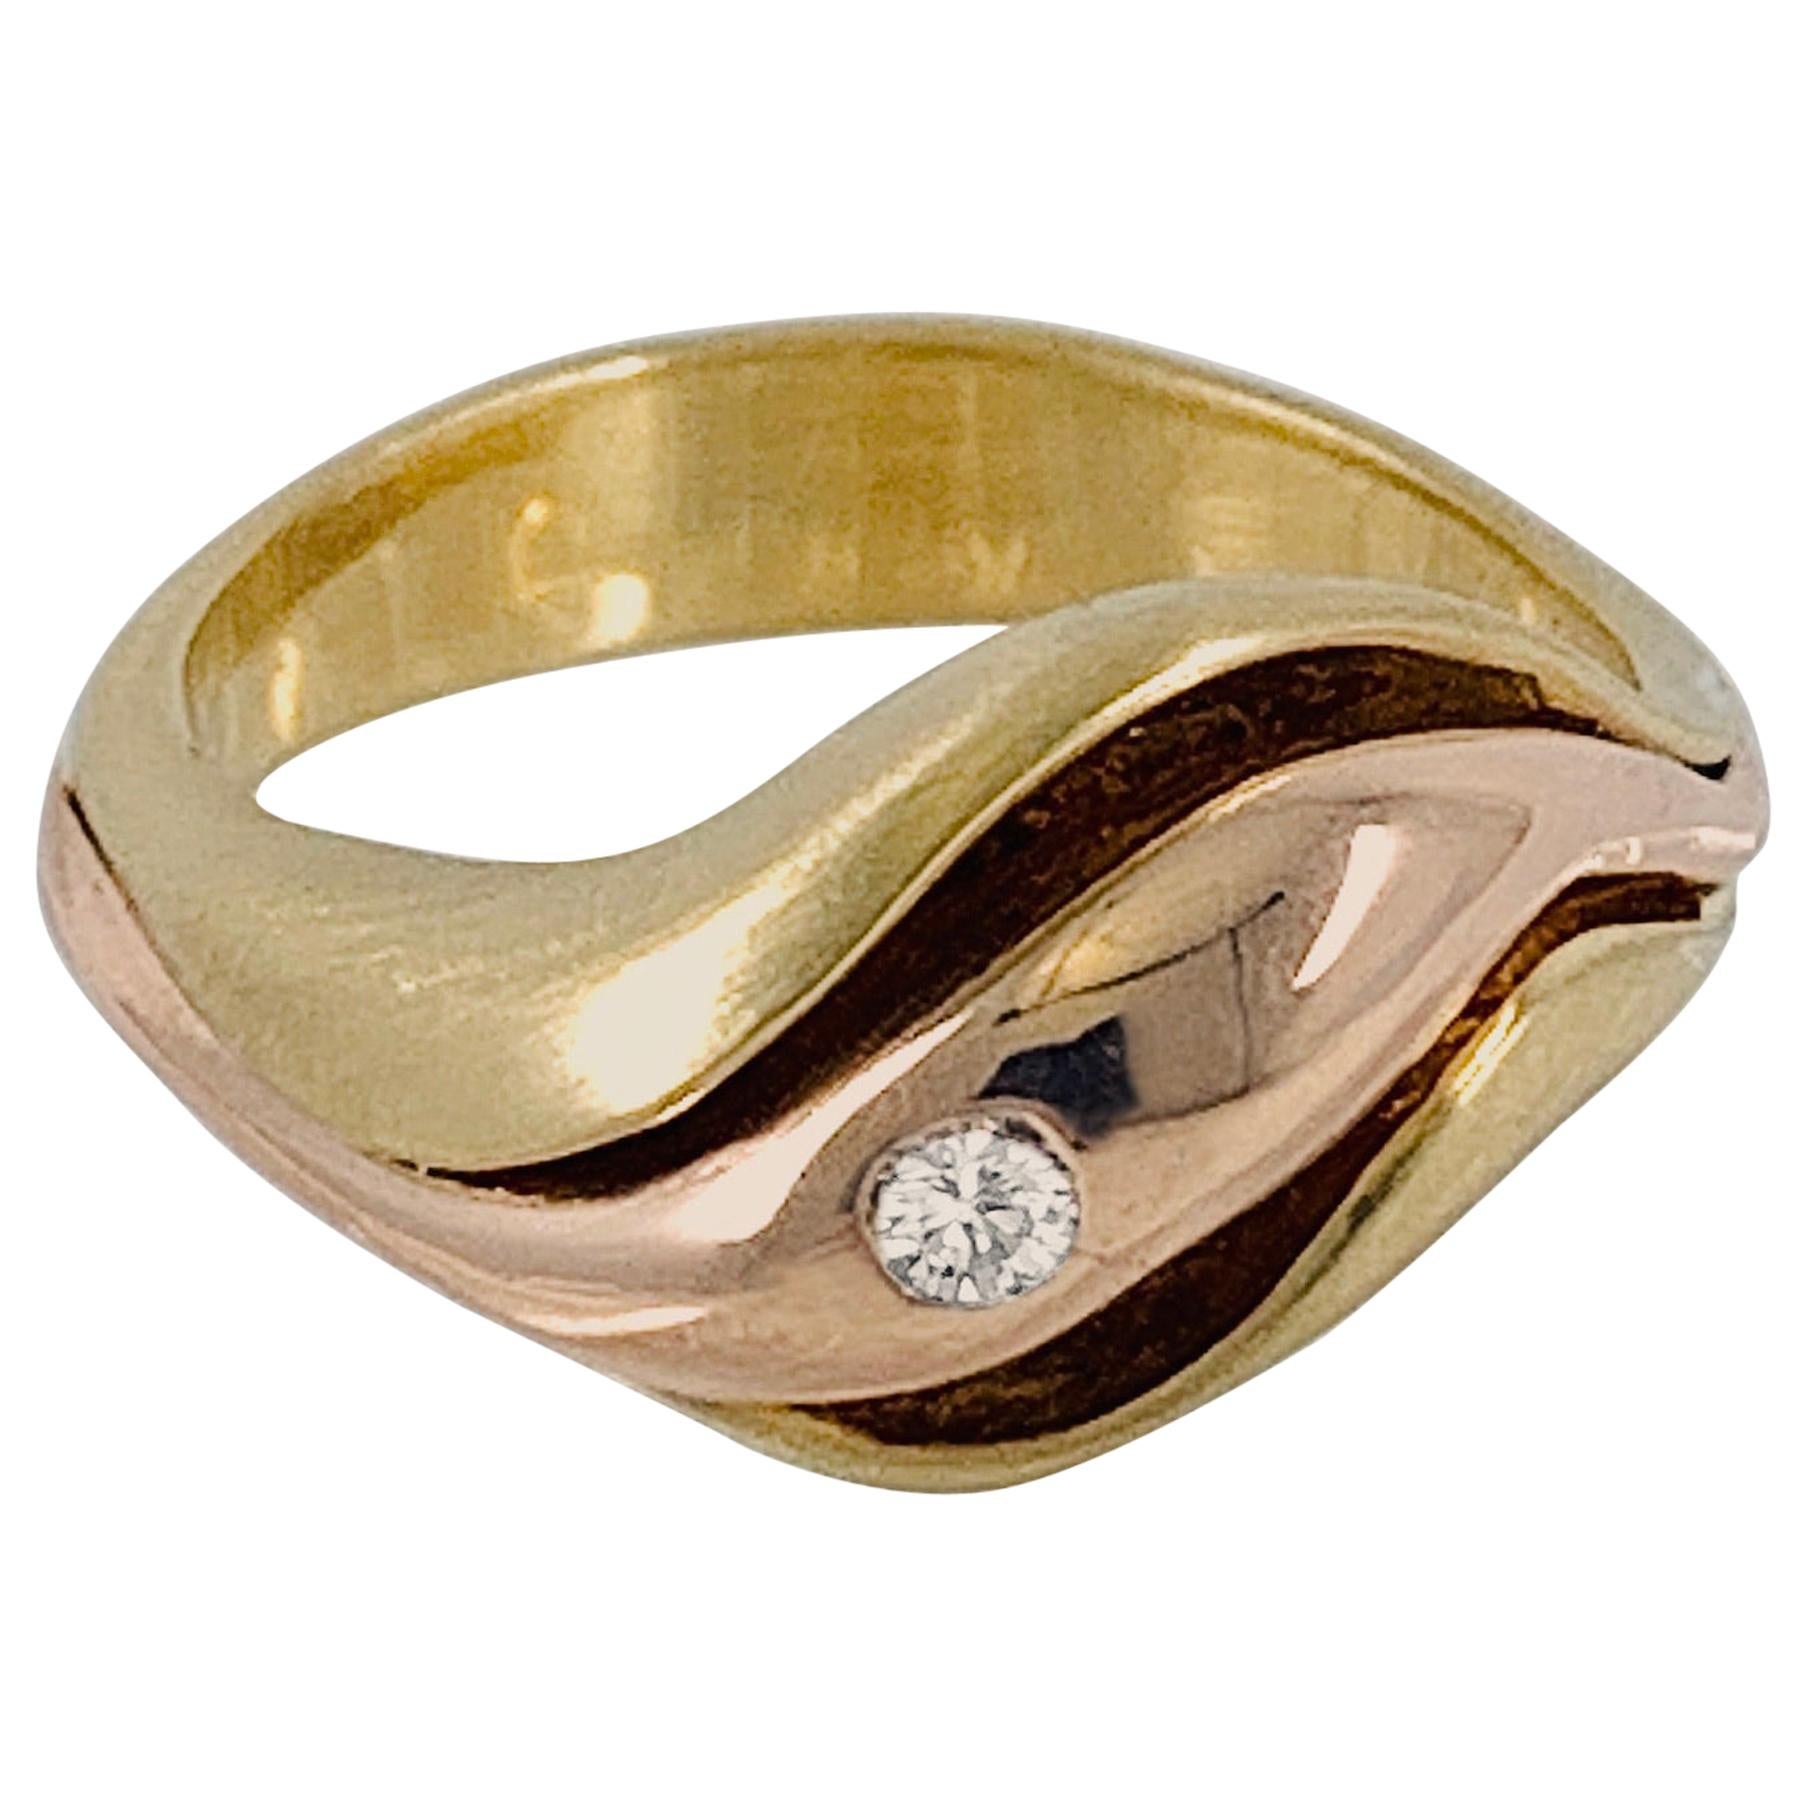 "Swerve" Contoured Band in Brushed Yellow and Polished Rose Gold with Diamond For Sale